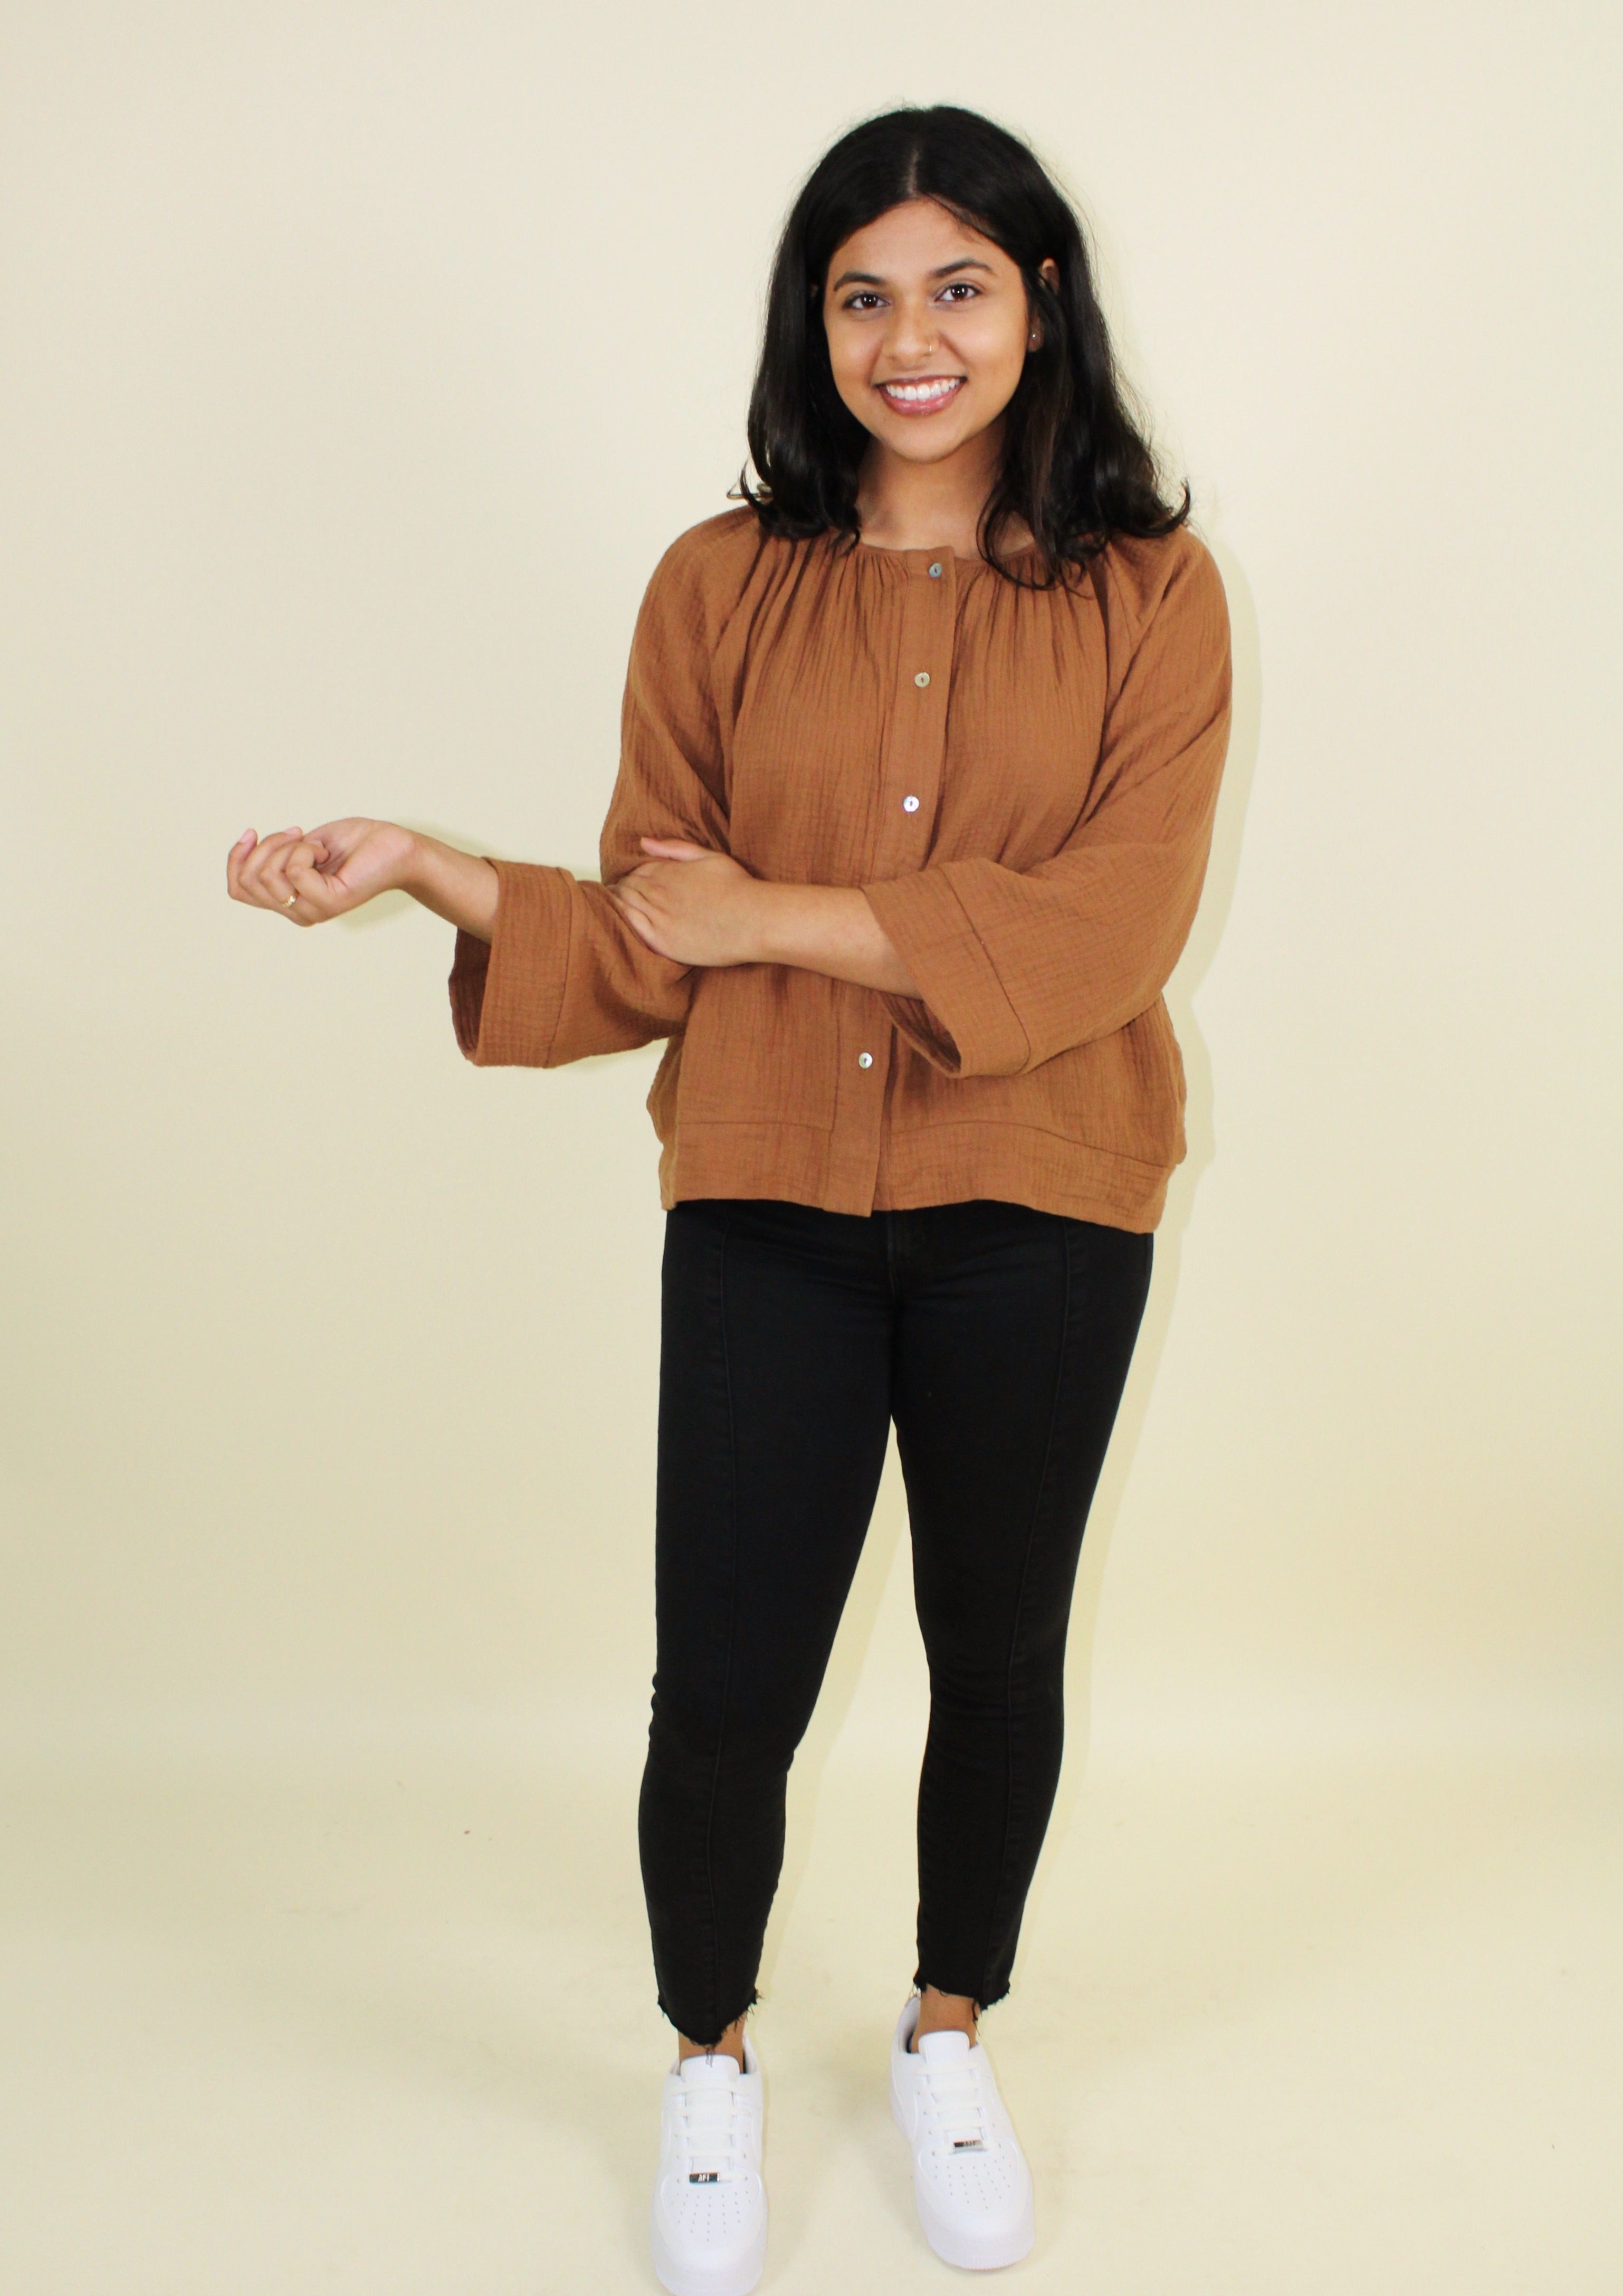 The Brown-Eyed Girl Loose-Fitting Blouse